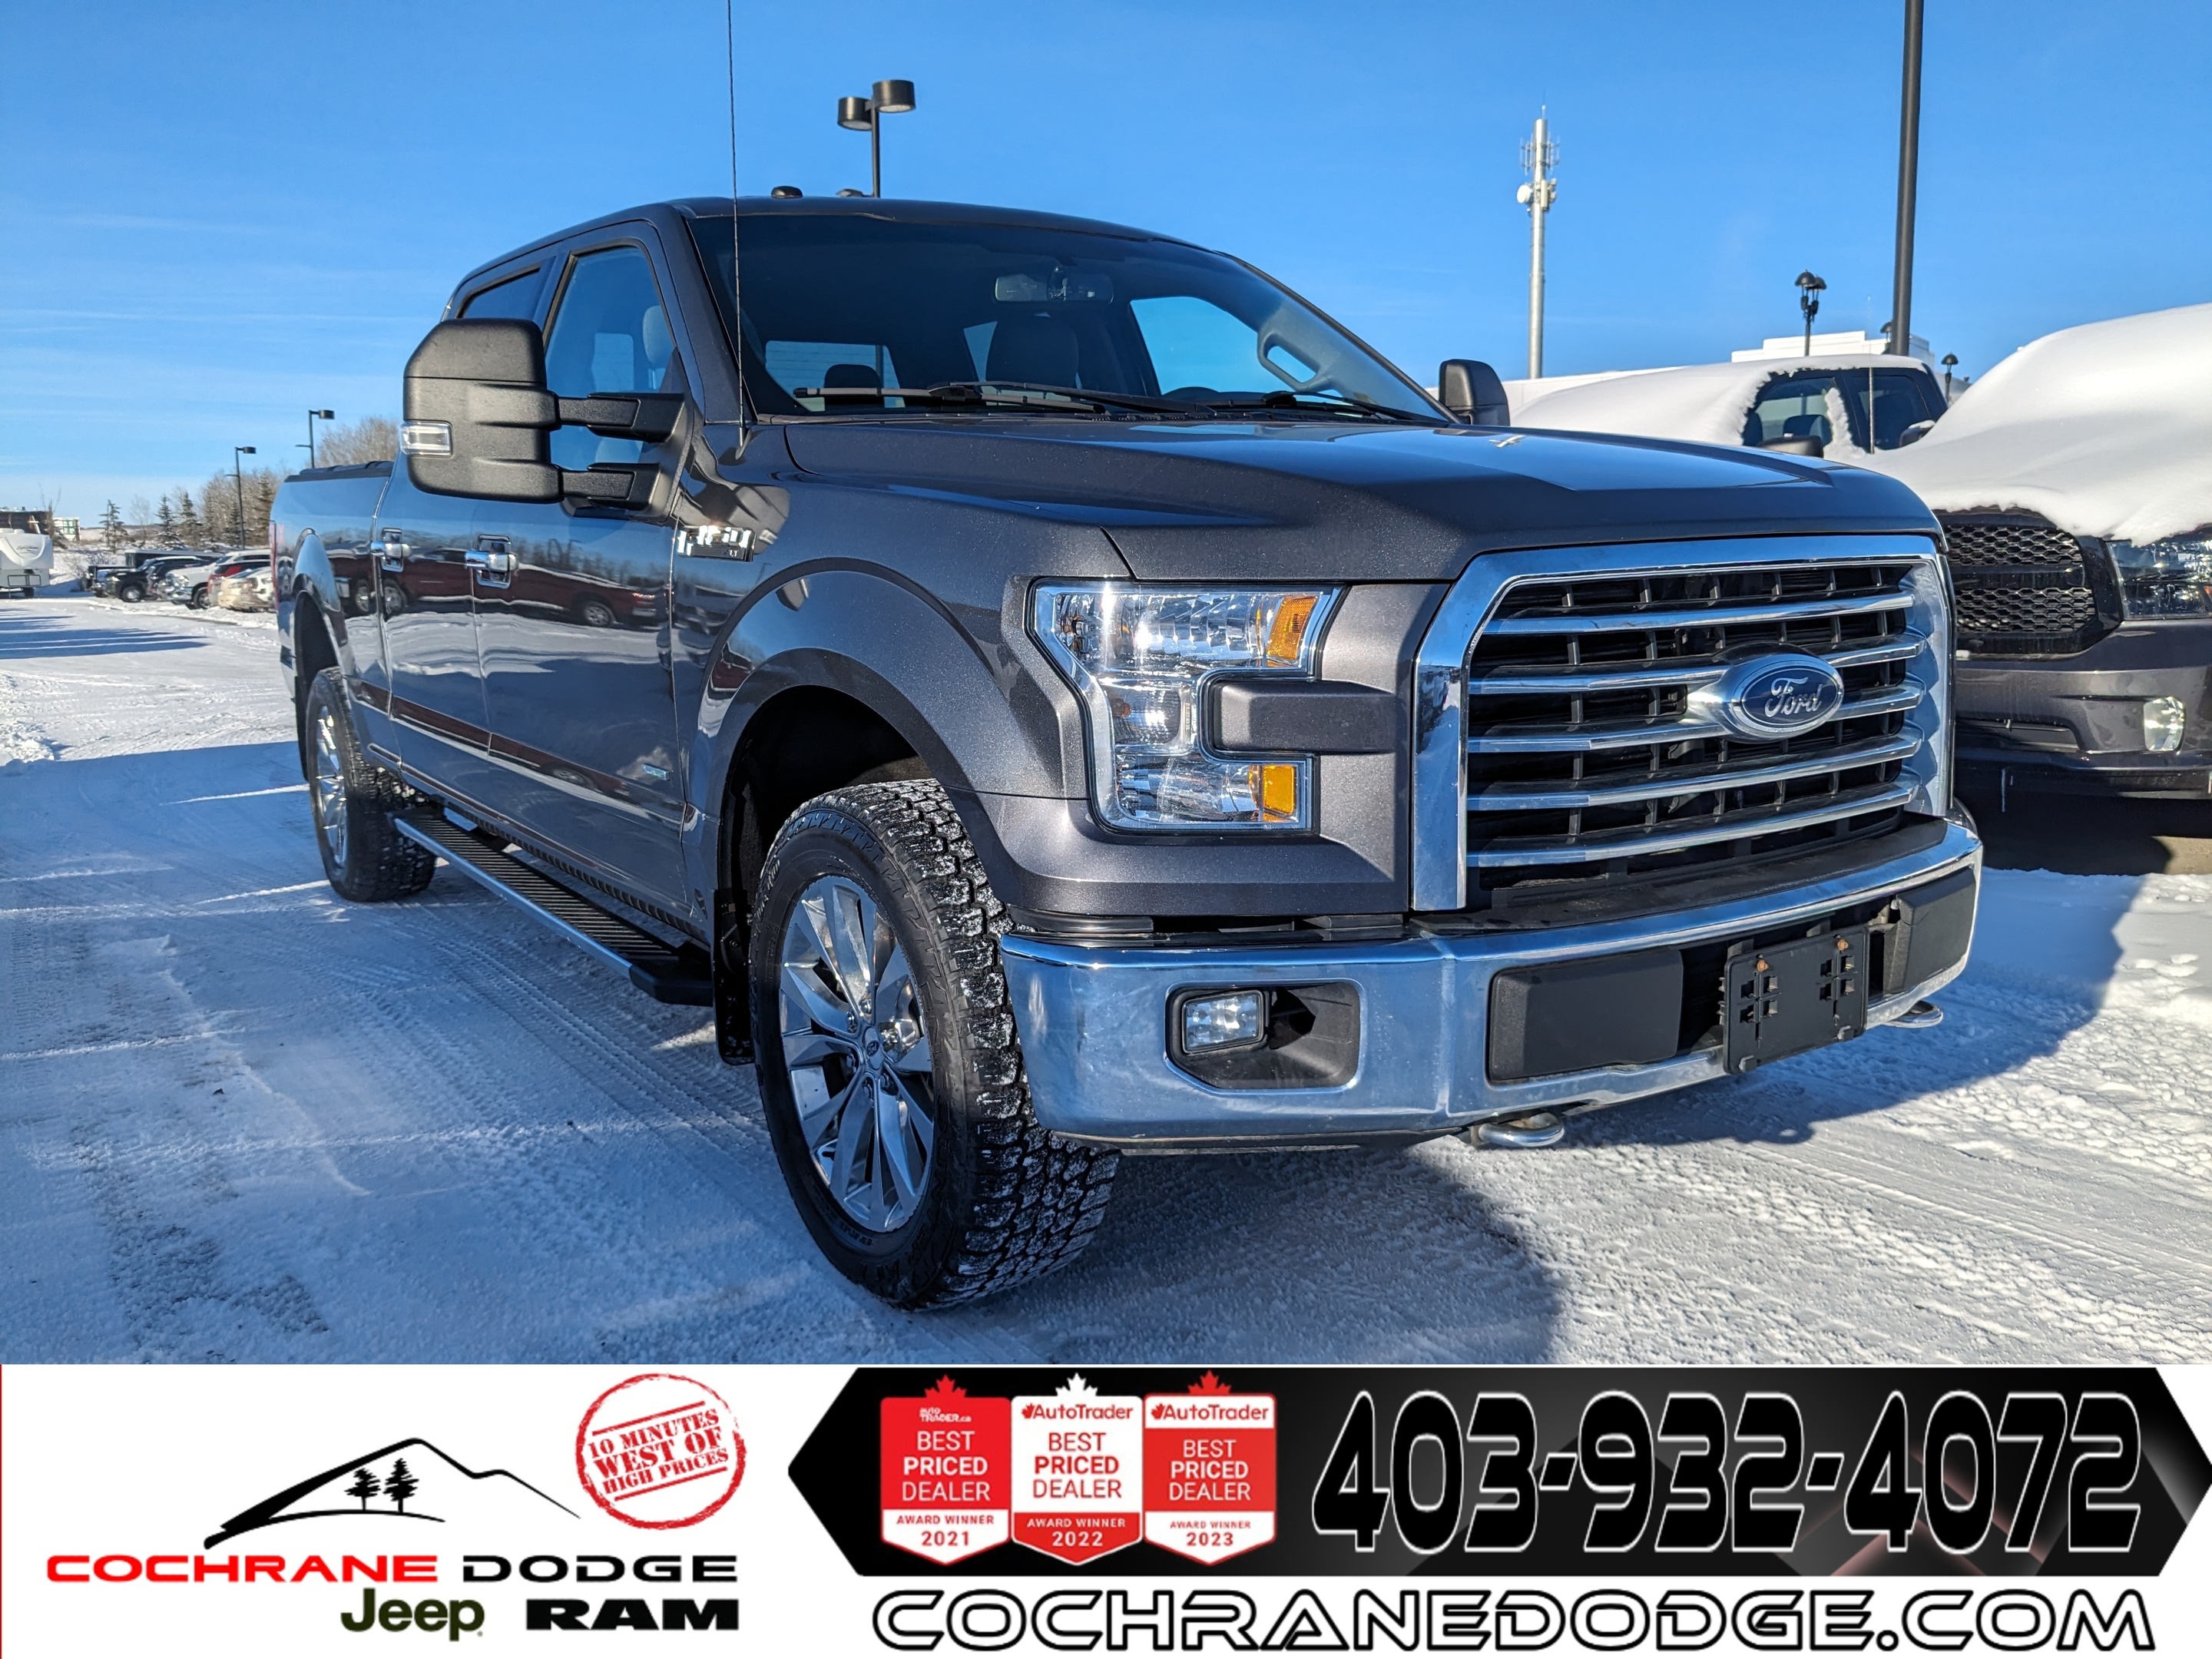 2016 Ford F-150 Supercrew Ecoboost! Great Shape!